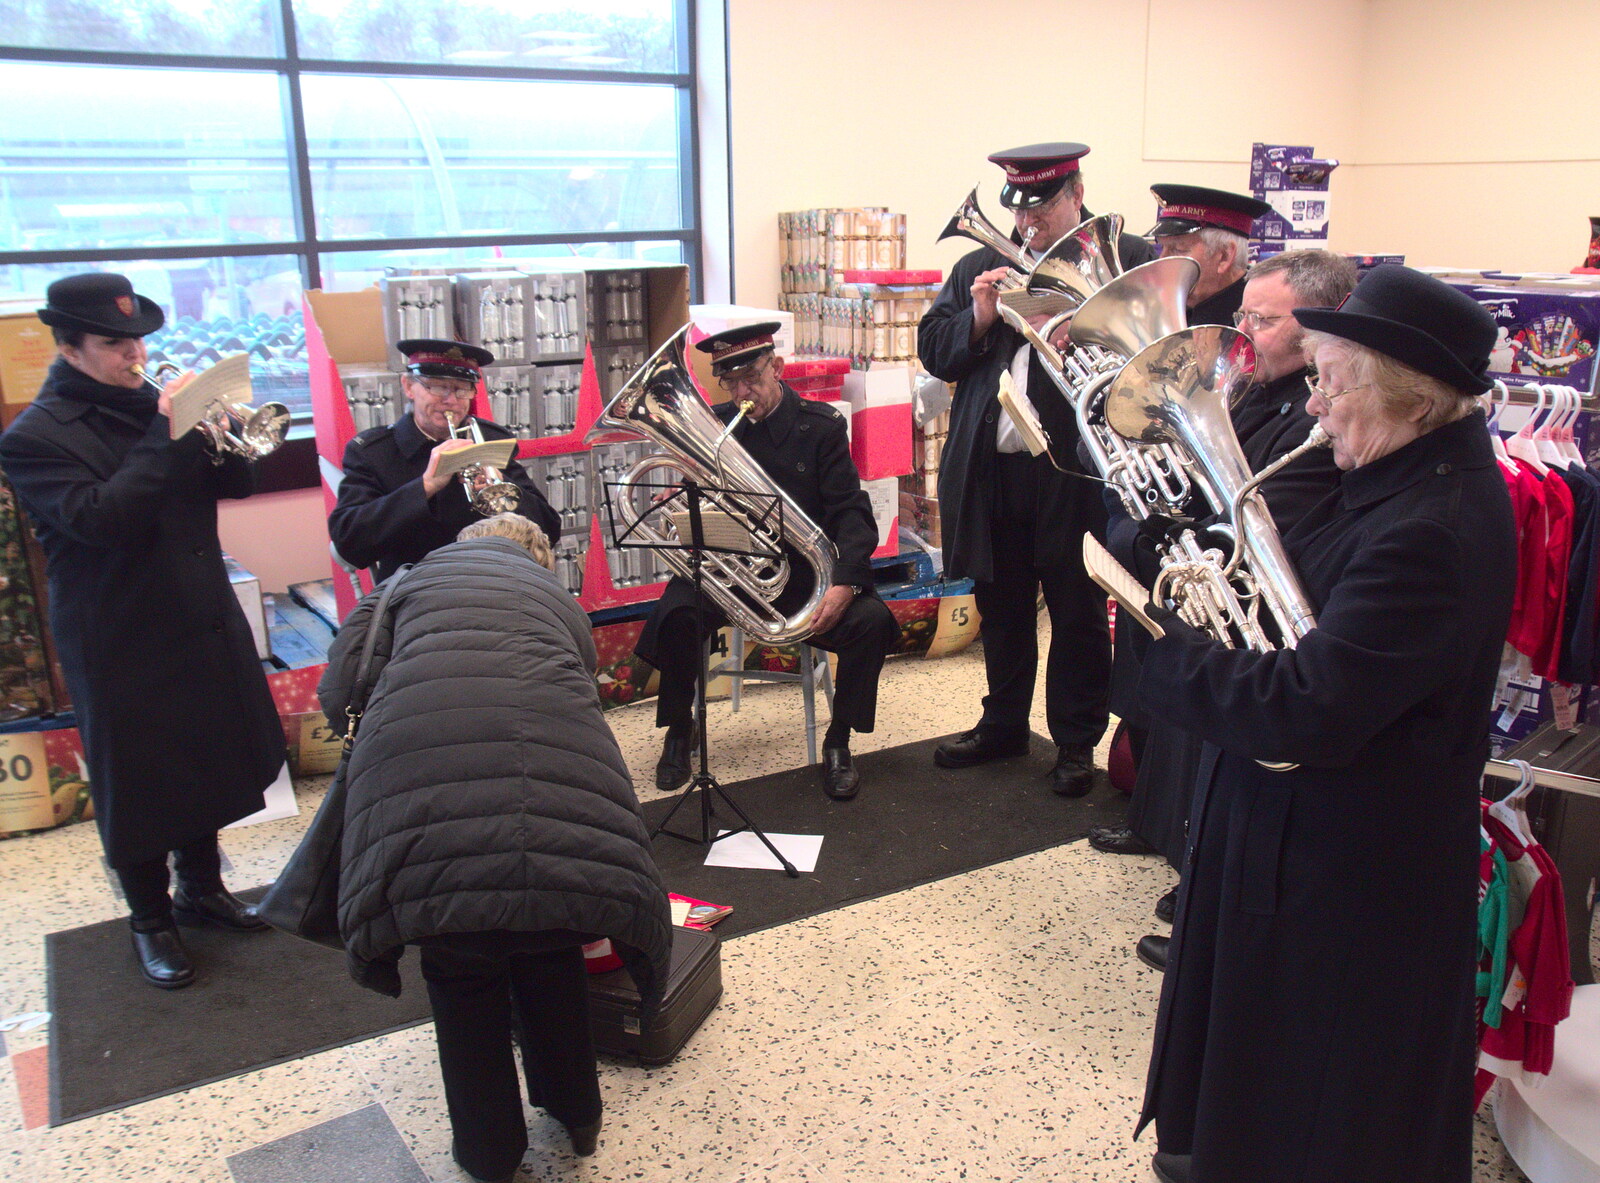 A sighting of the Salvation Army band from A Spot of Christmas Shopping, Norwich and Diss, Norfolk - 23rd December 2017